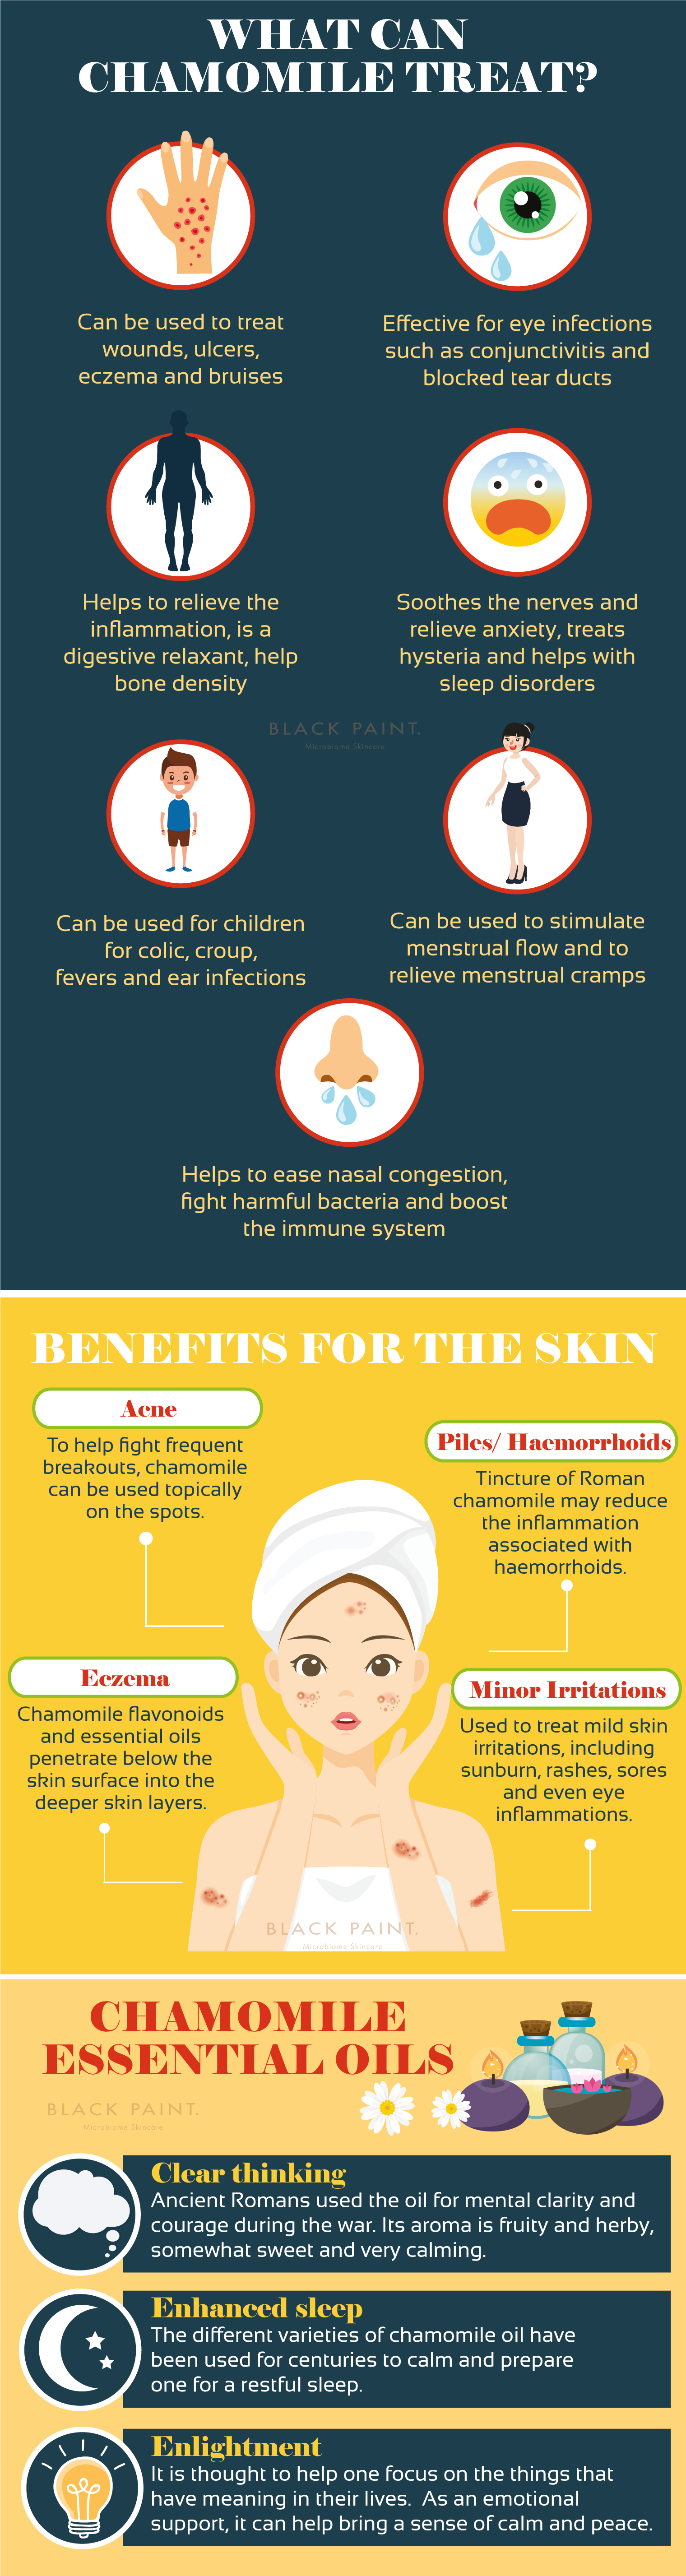 benefits of chamomile for health part 2